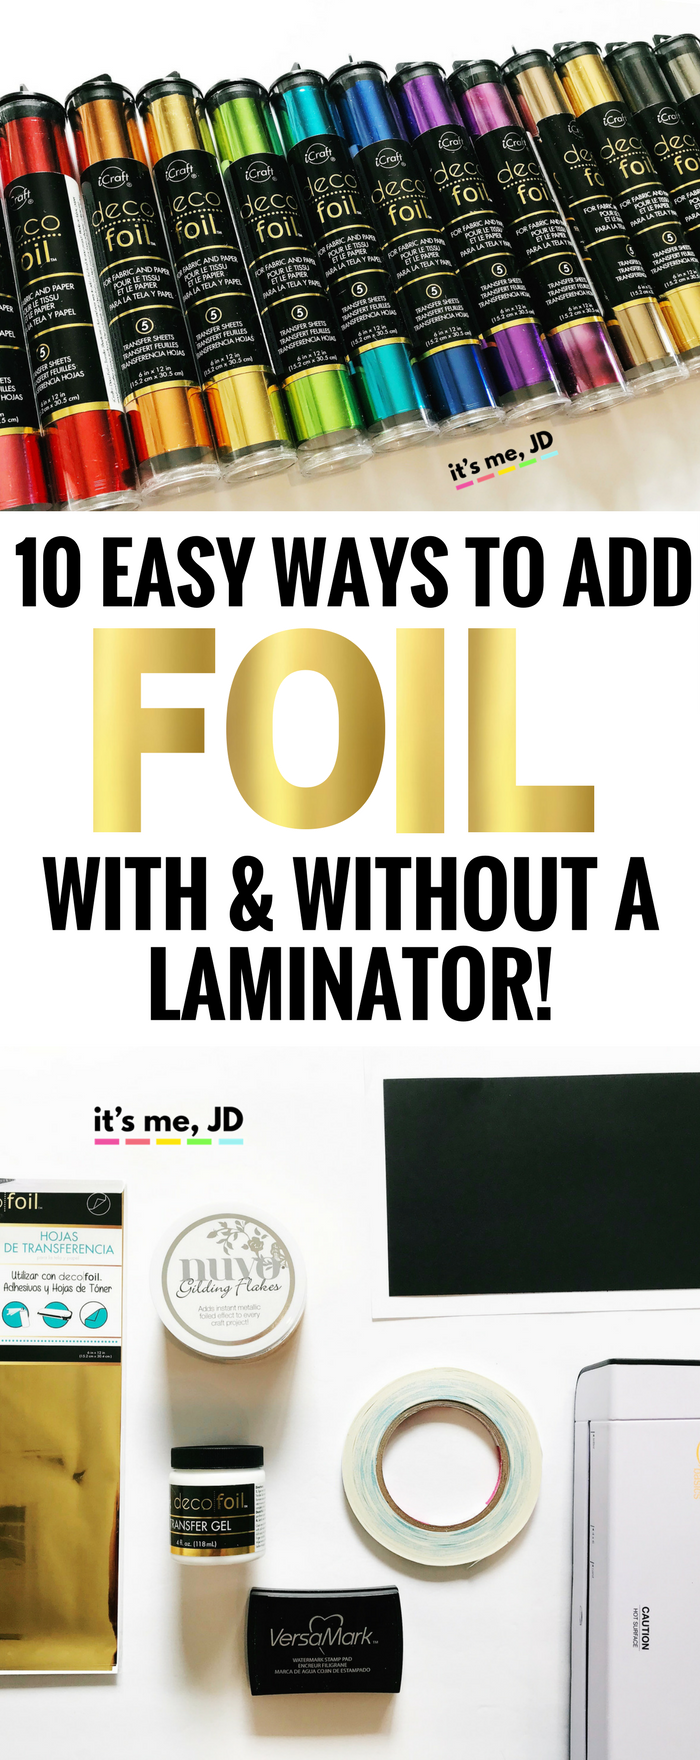 #foil #crafts 10 Easy Ways to Add Foil, to Paper Crafts, With and Without a Laminator 